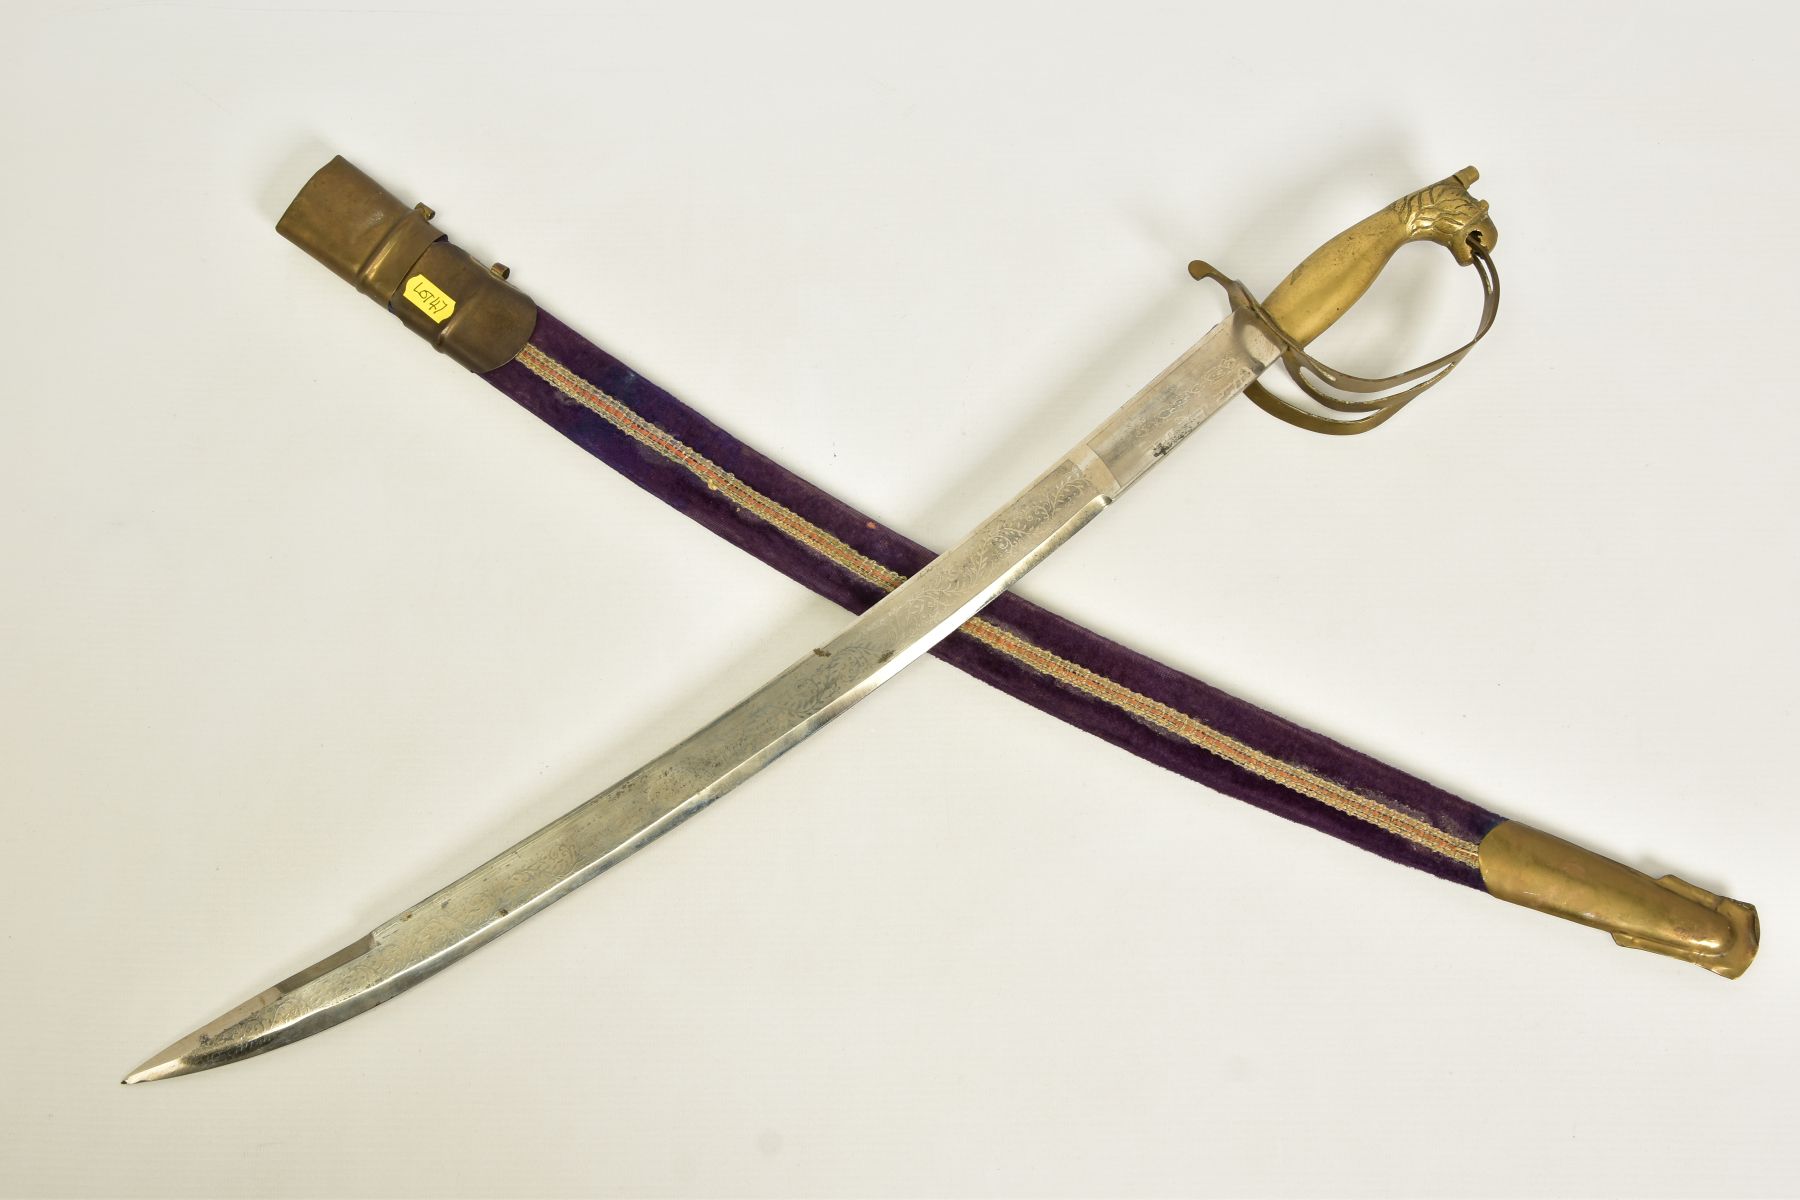 AN INDIAN MADE CURVED SWORD, in a wooden scabbard trimmed with purple coloured velvet style cloth